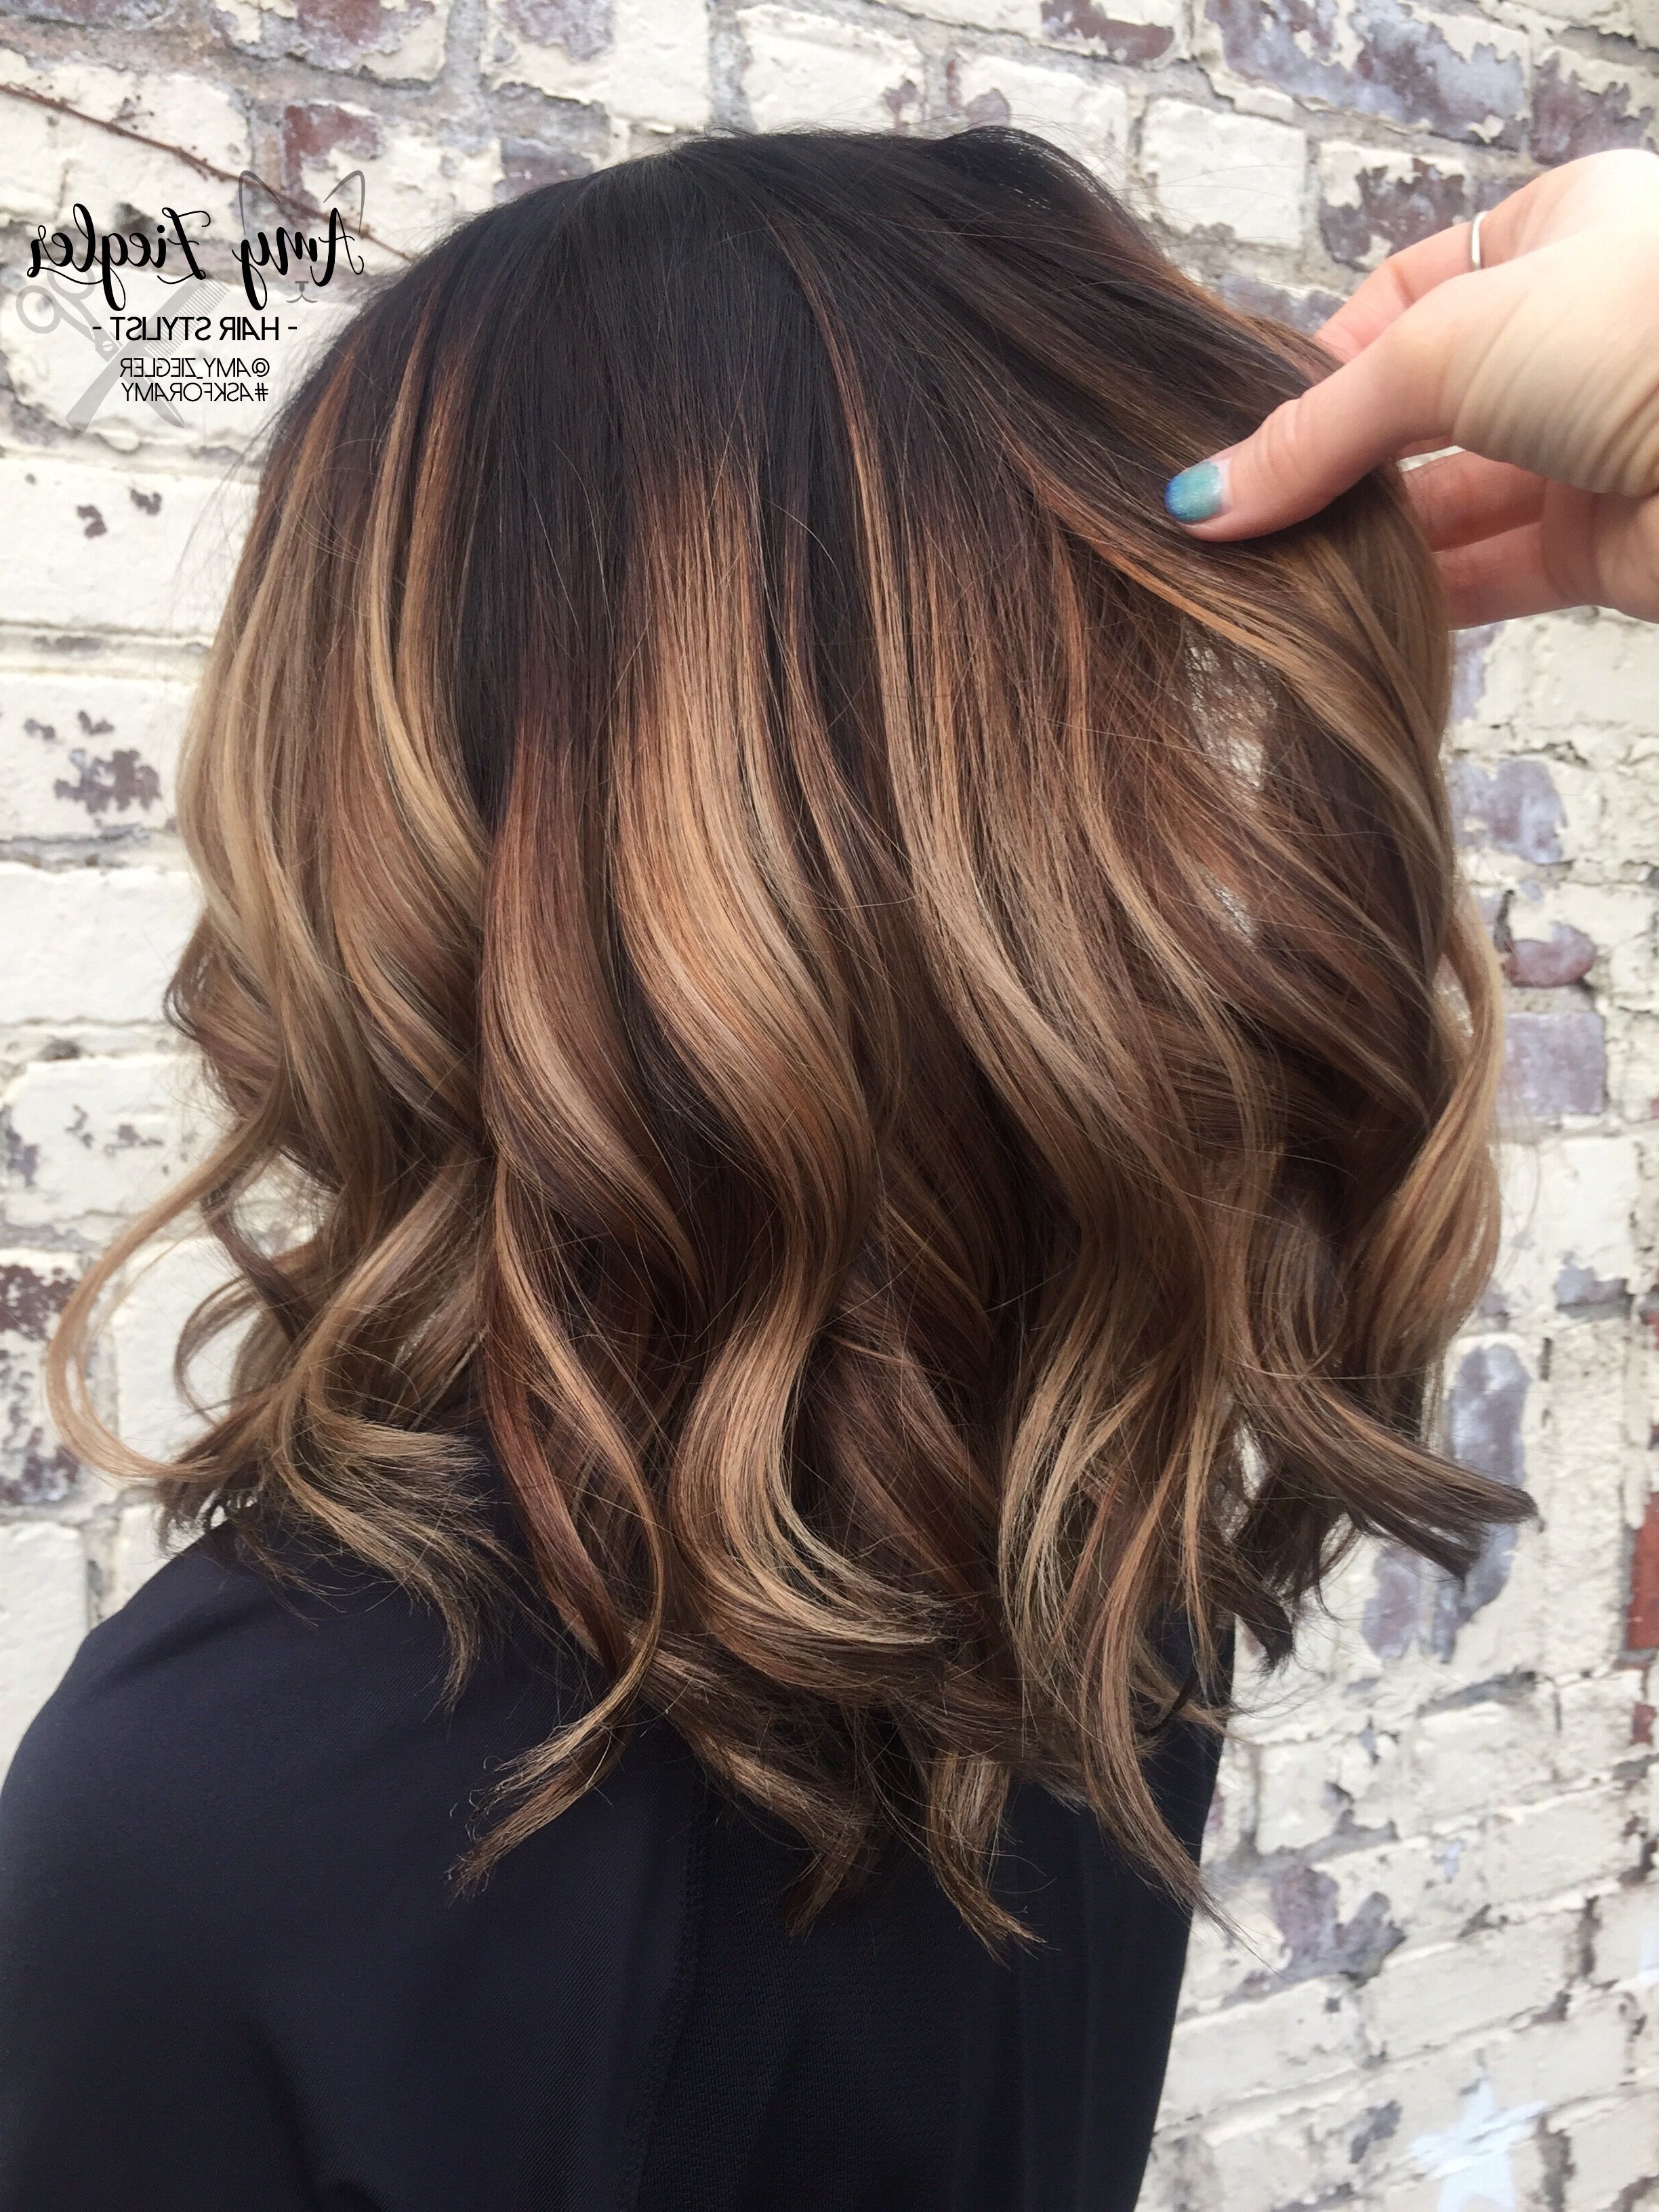 Chunky Blonde Balayage On Dark Hair@askforamy #askforamy Within Newest Shaggy Pixie Haircuts With Balayage Highlights (View 12 of 15)